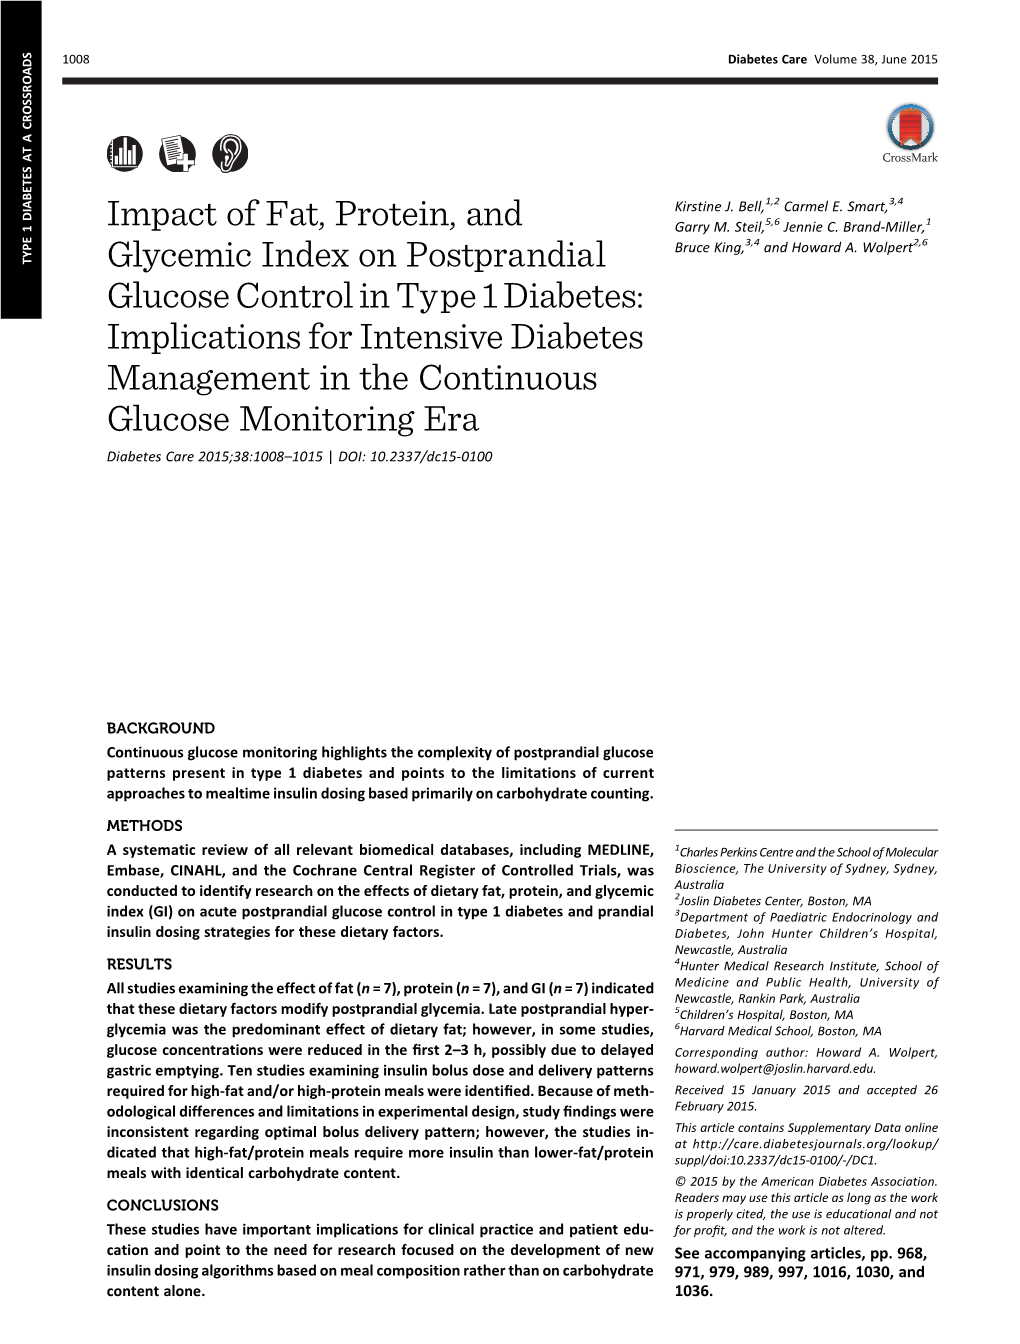 Impact of Fat, Protein, and Glycemic Index on Postprandial Glucose